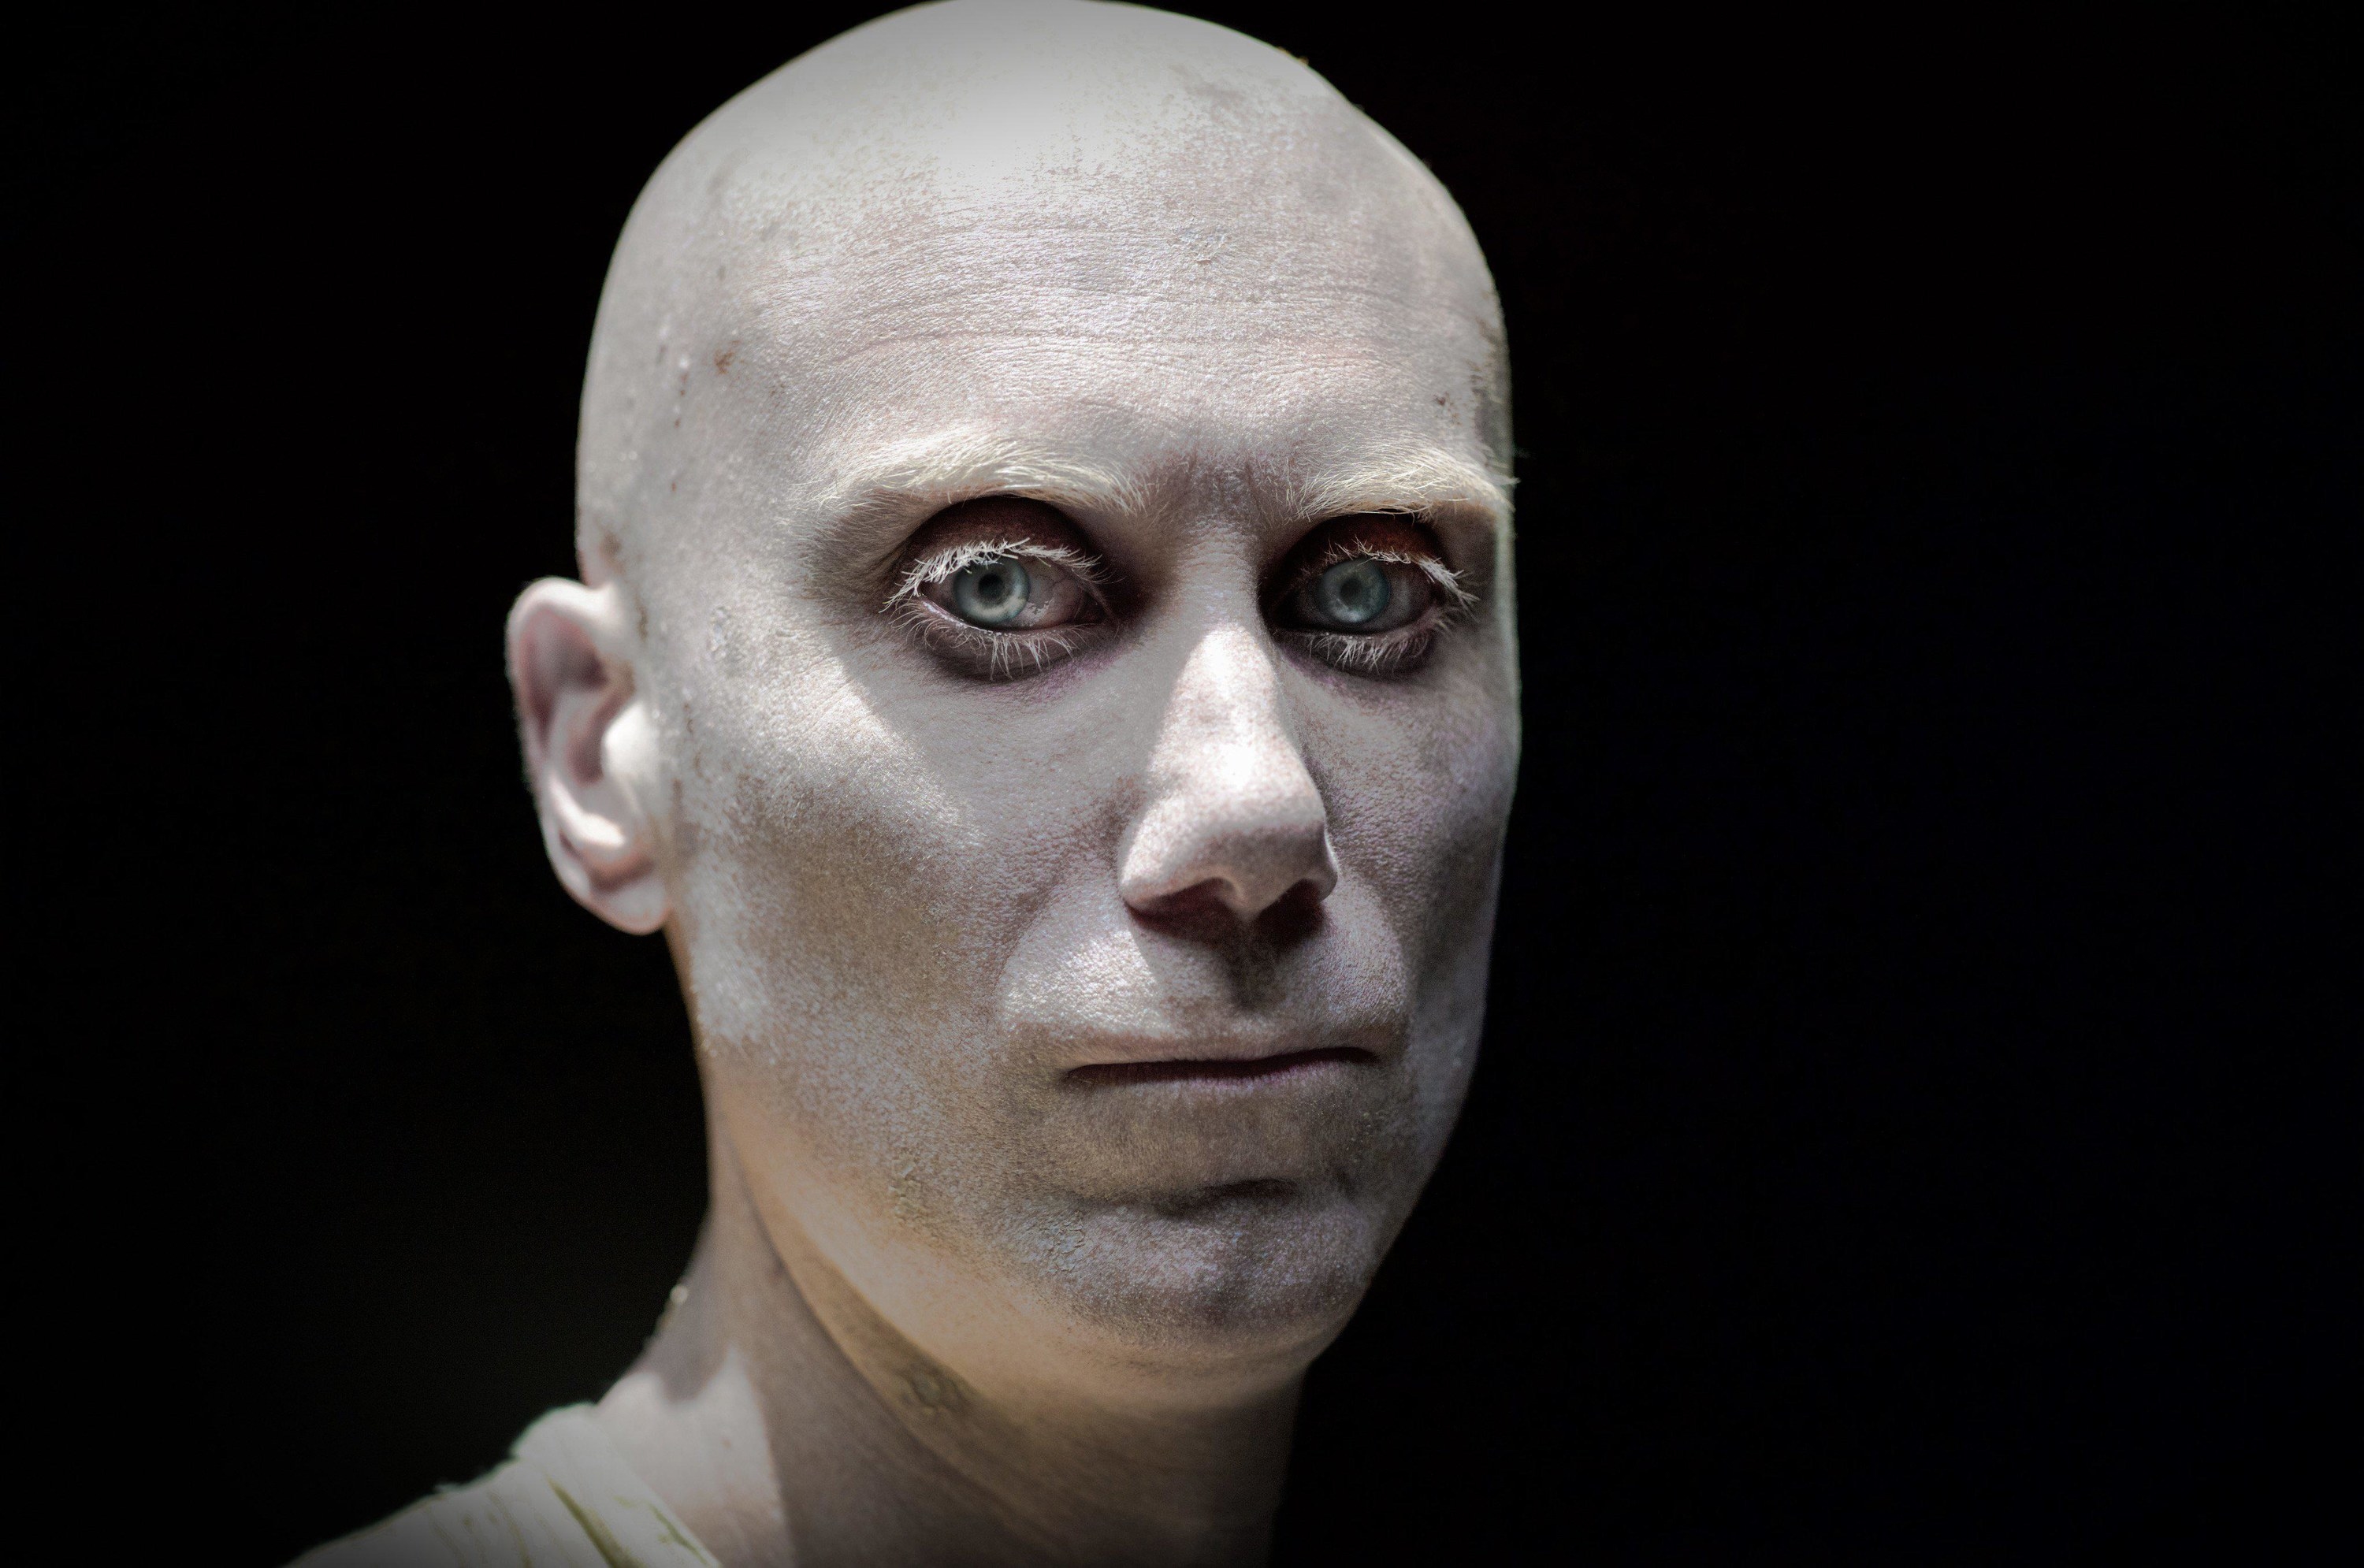 A bald albino mutant stares directly into the camera against a black background